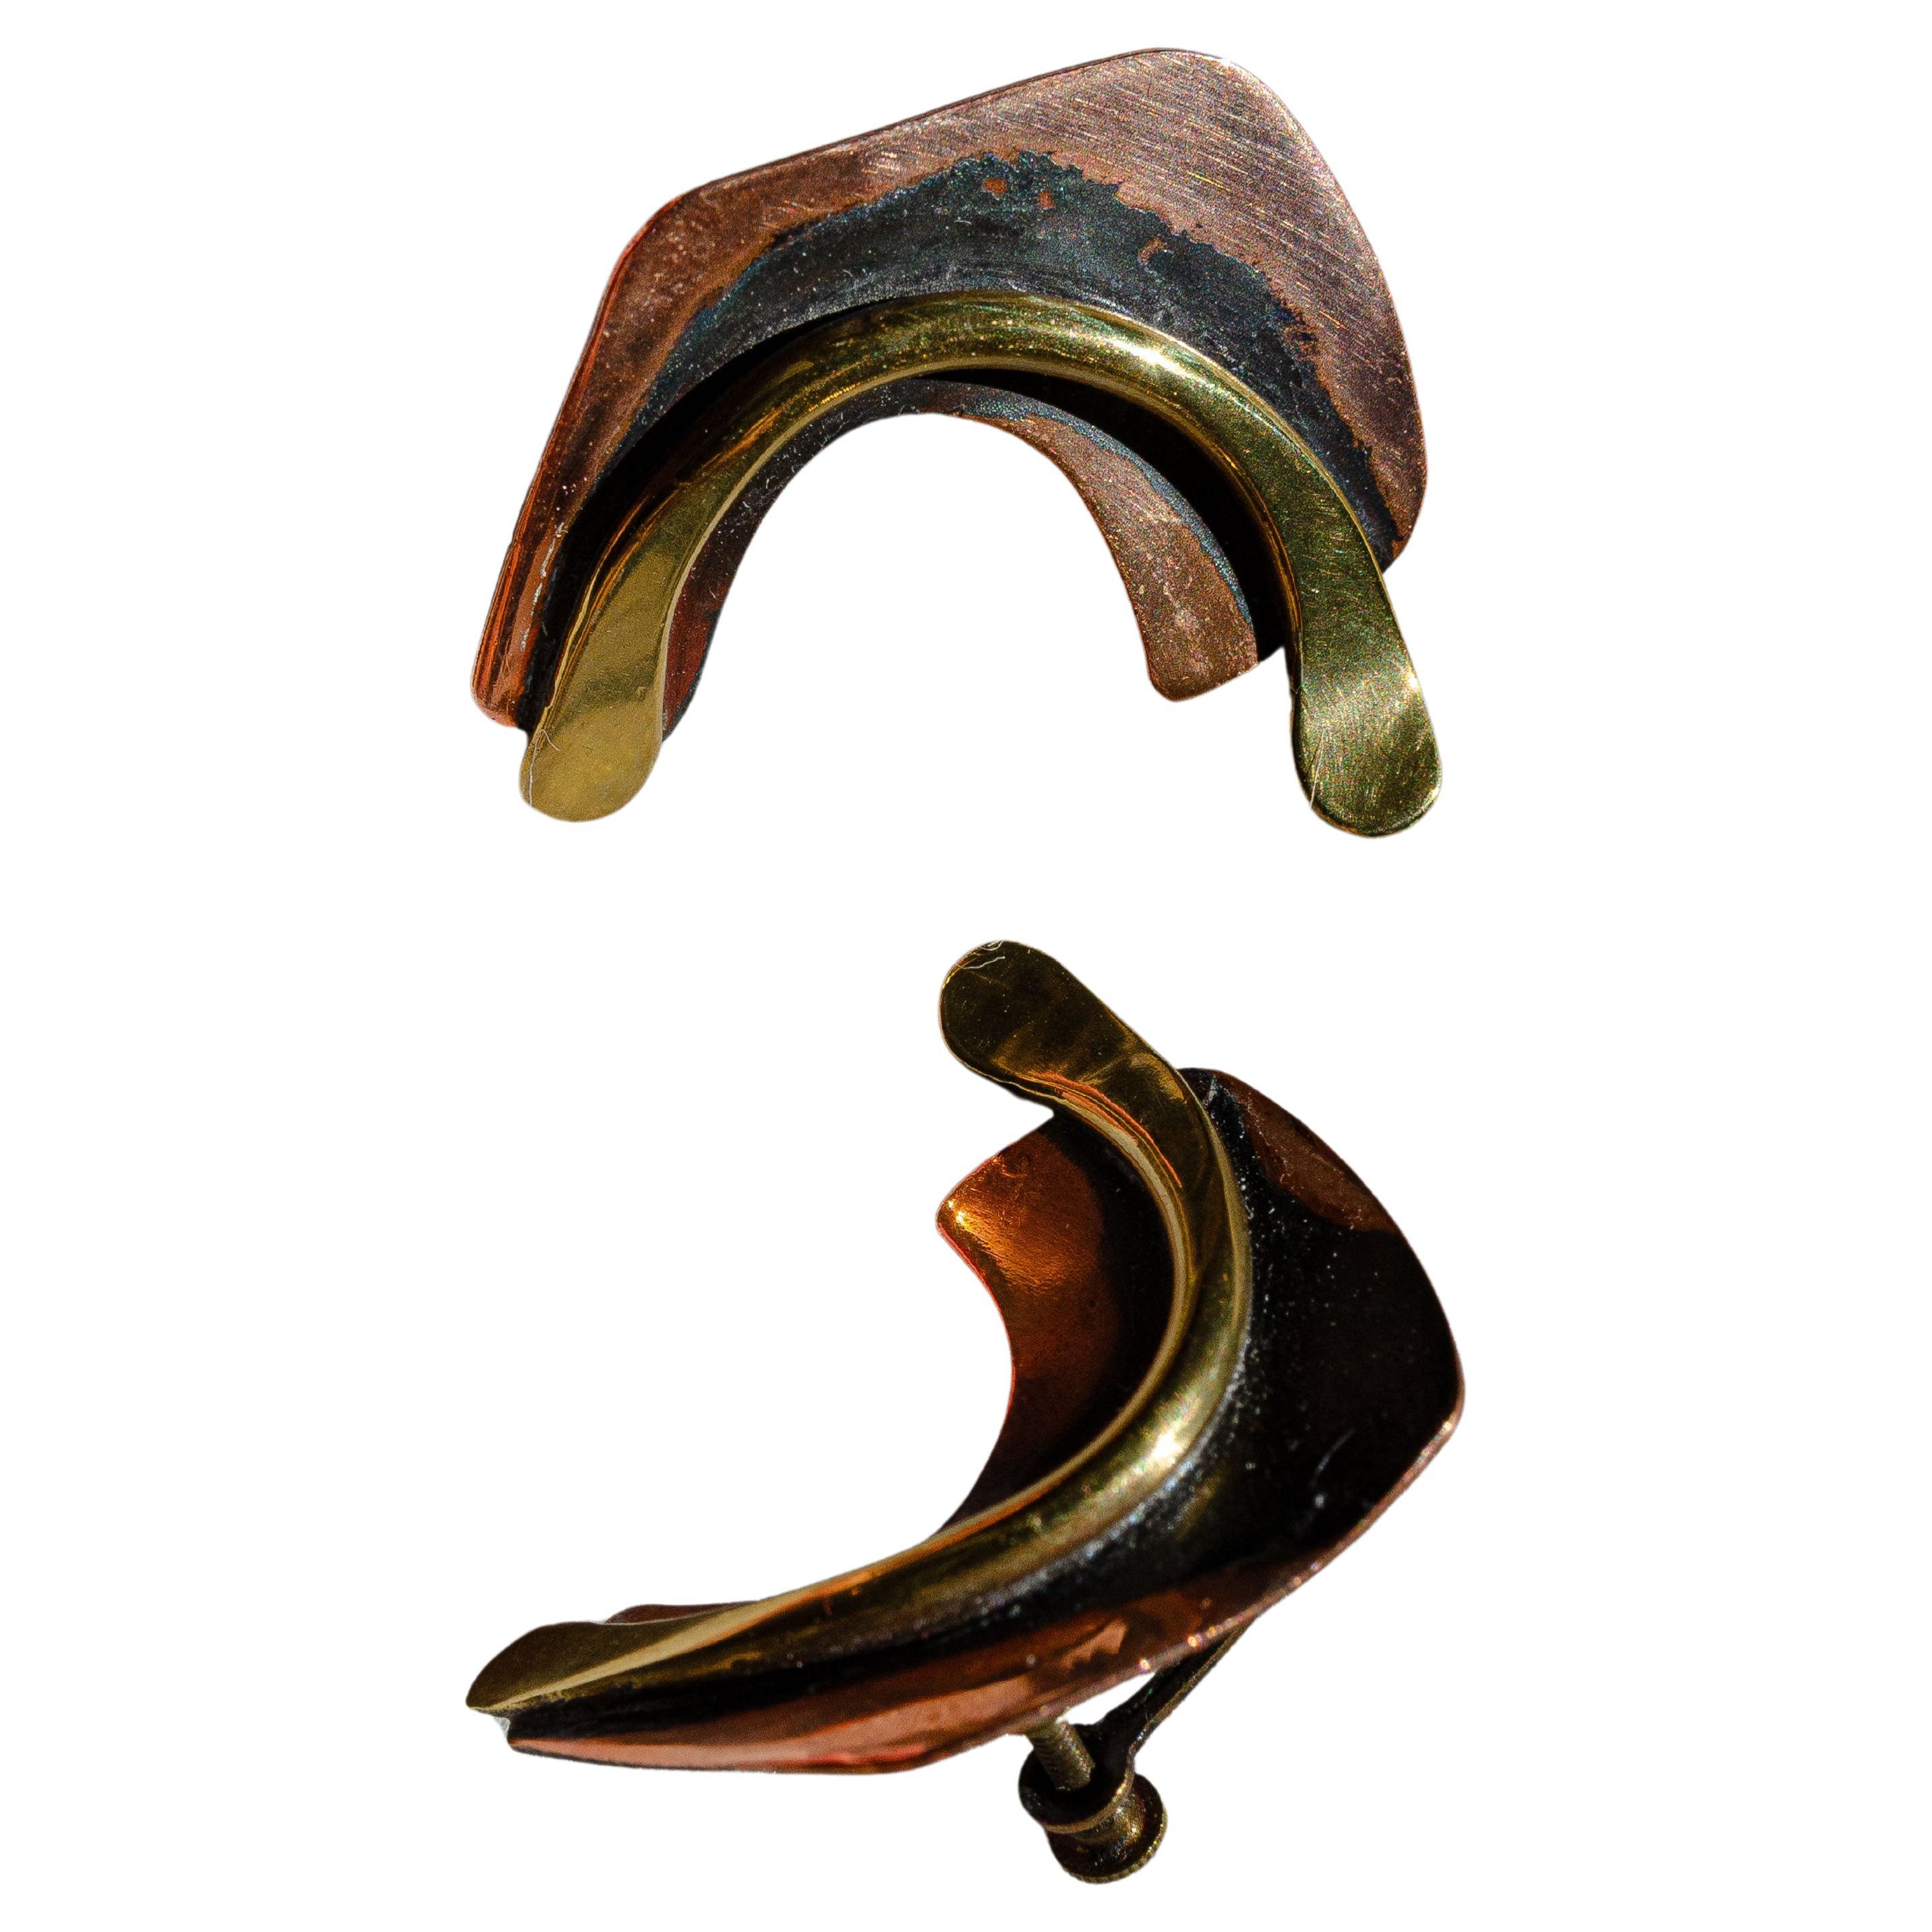 Dynamic Mid-Century Modernist Copper and Brass Biomorphic Earrings By Art Smith